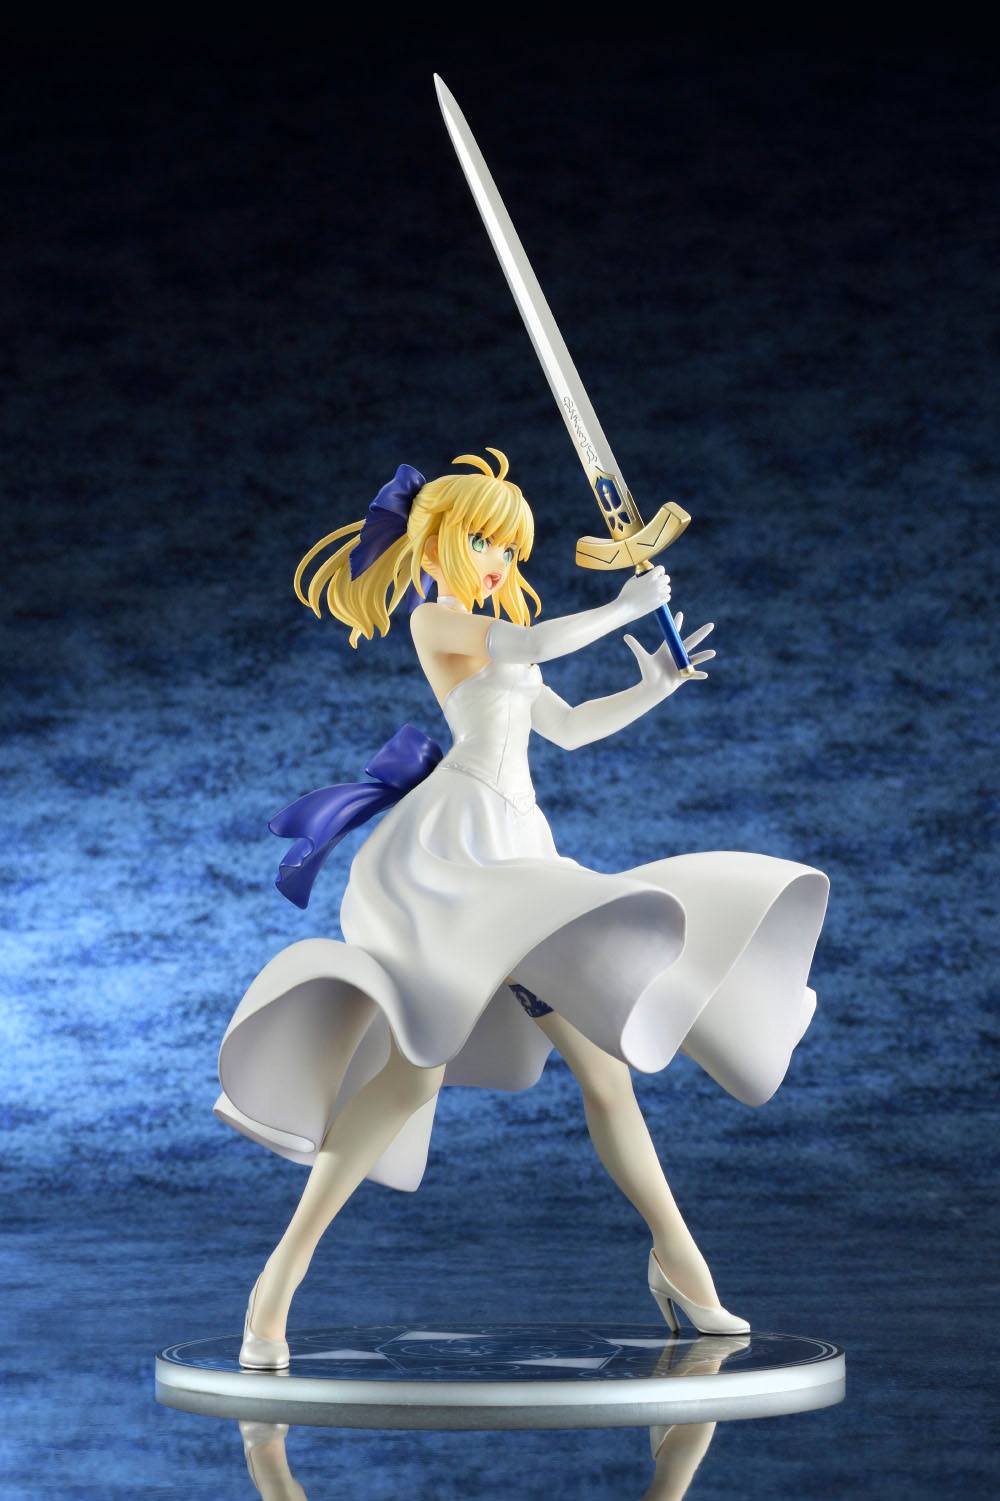 Saber - White Dress Renewal Version / Fate/Stay Night Unlimited Blade Works